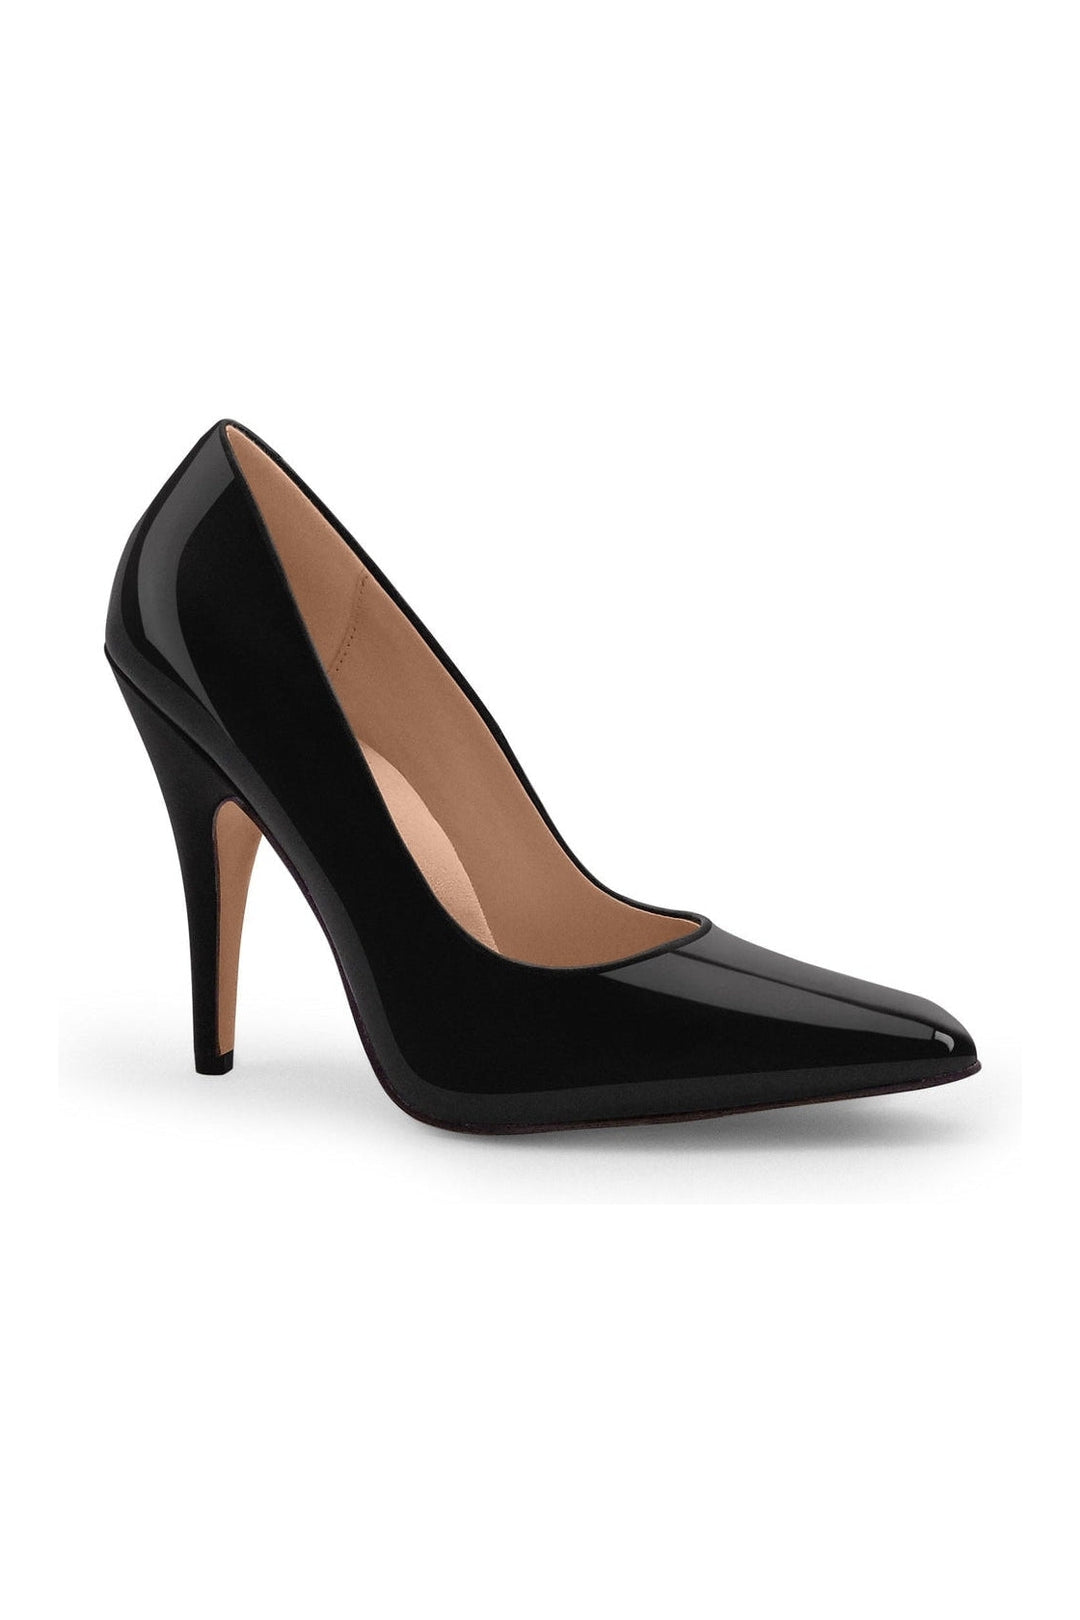 Classic Sexy Wide Width Pump-Pumps-Sexyshoes Signature-Black-SEXYSHOES.COM